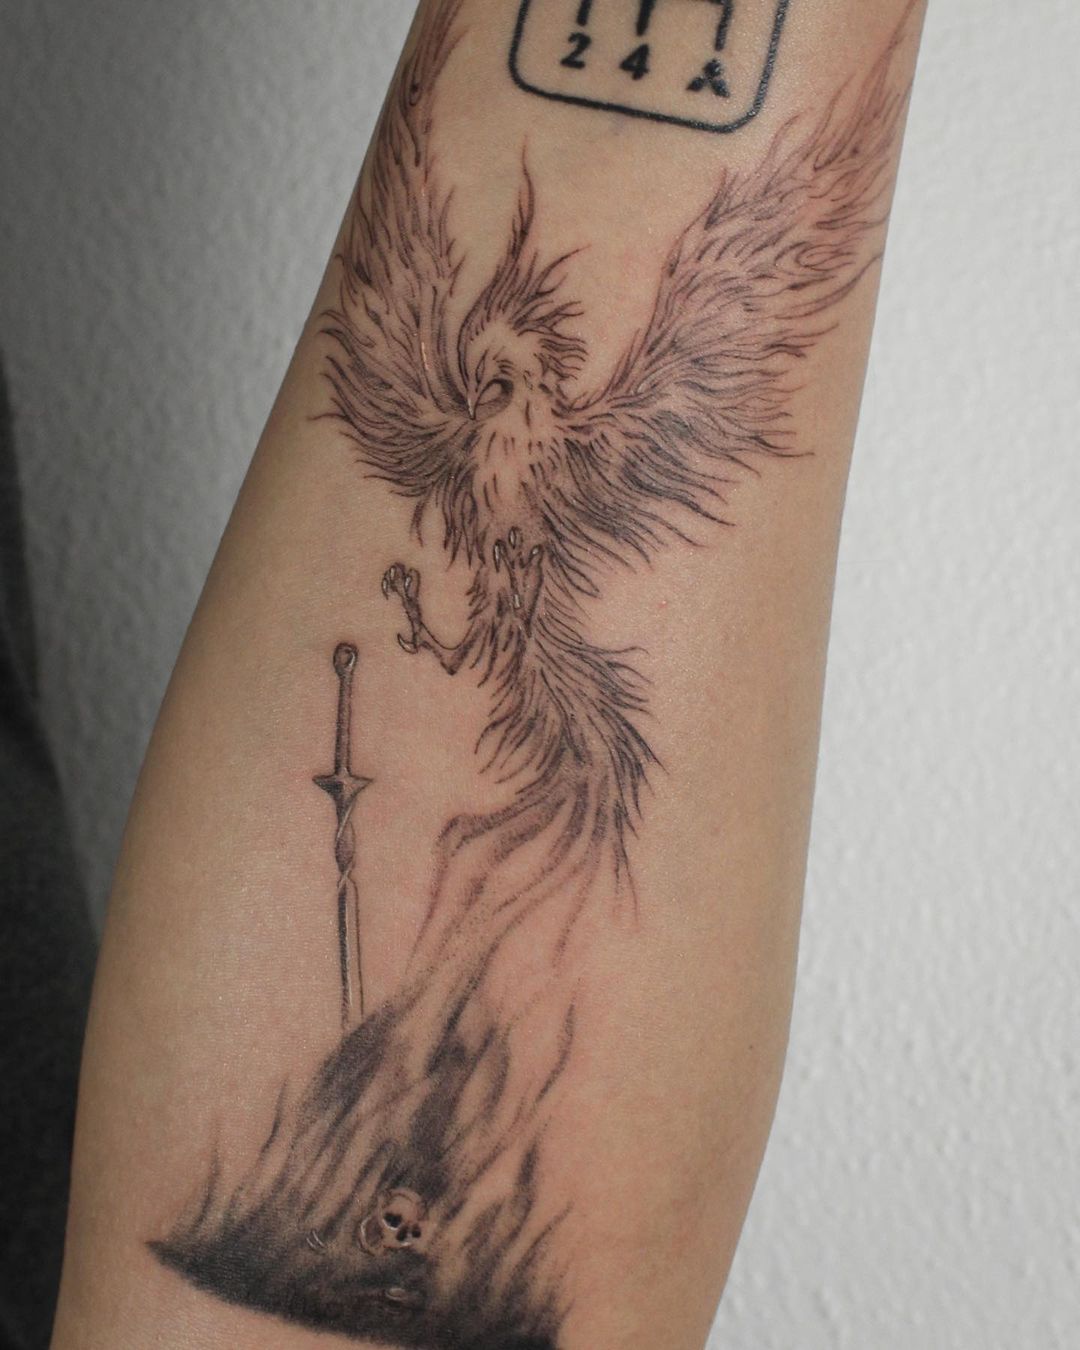 Phoenix With Sword And Skull Tattoo